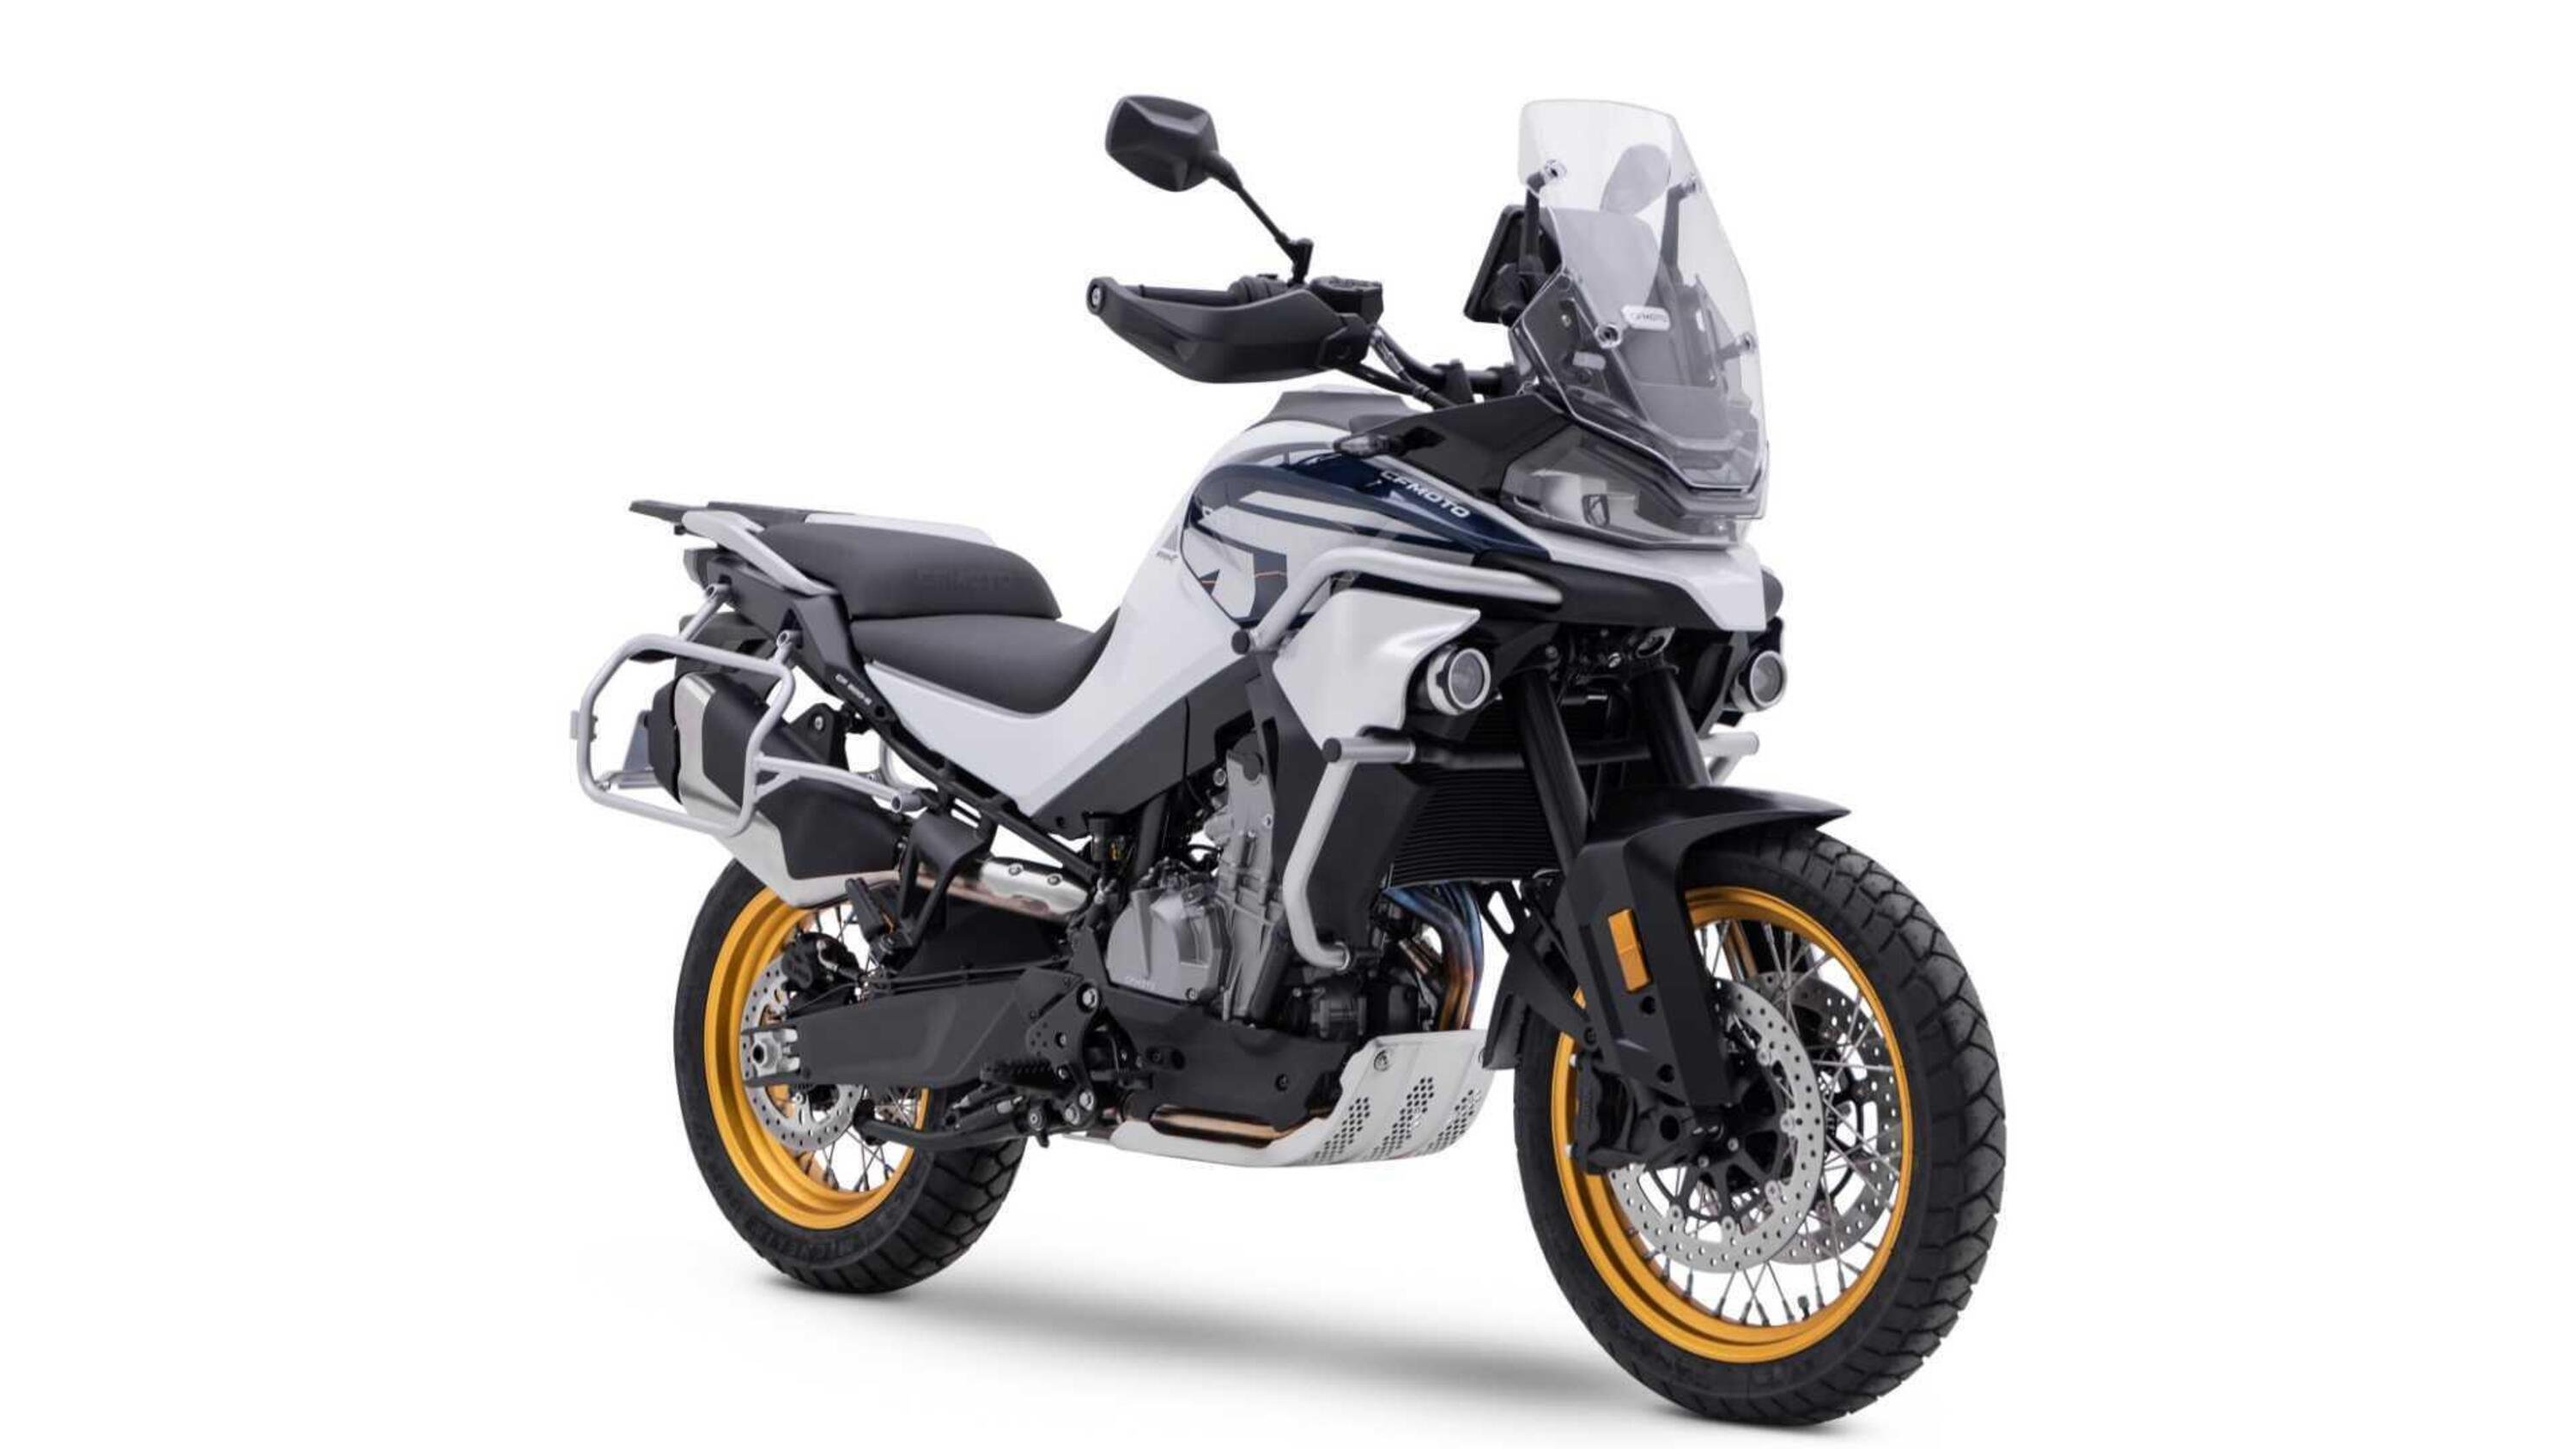 LIMITED-EDITION CFMOTO 800MT TOURING